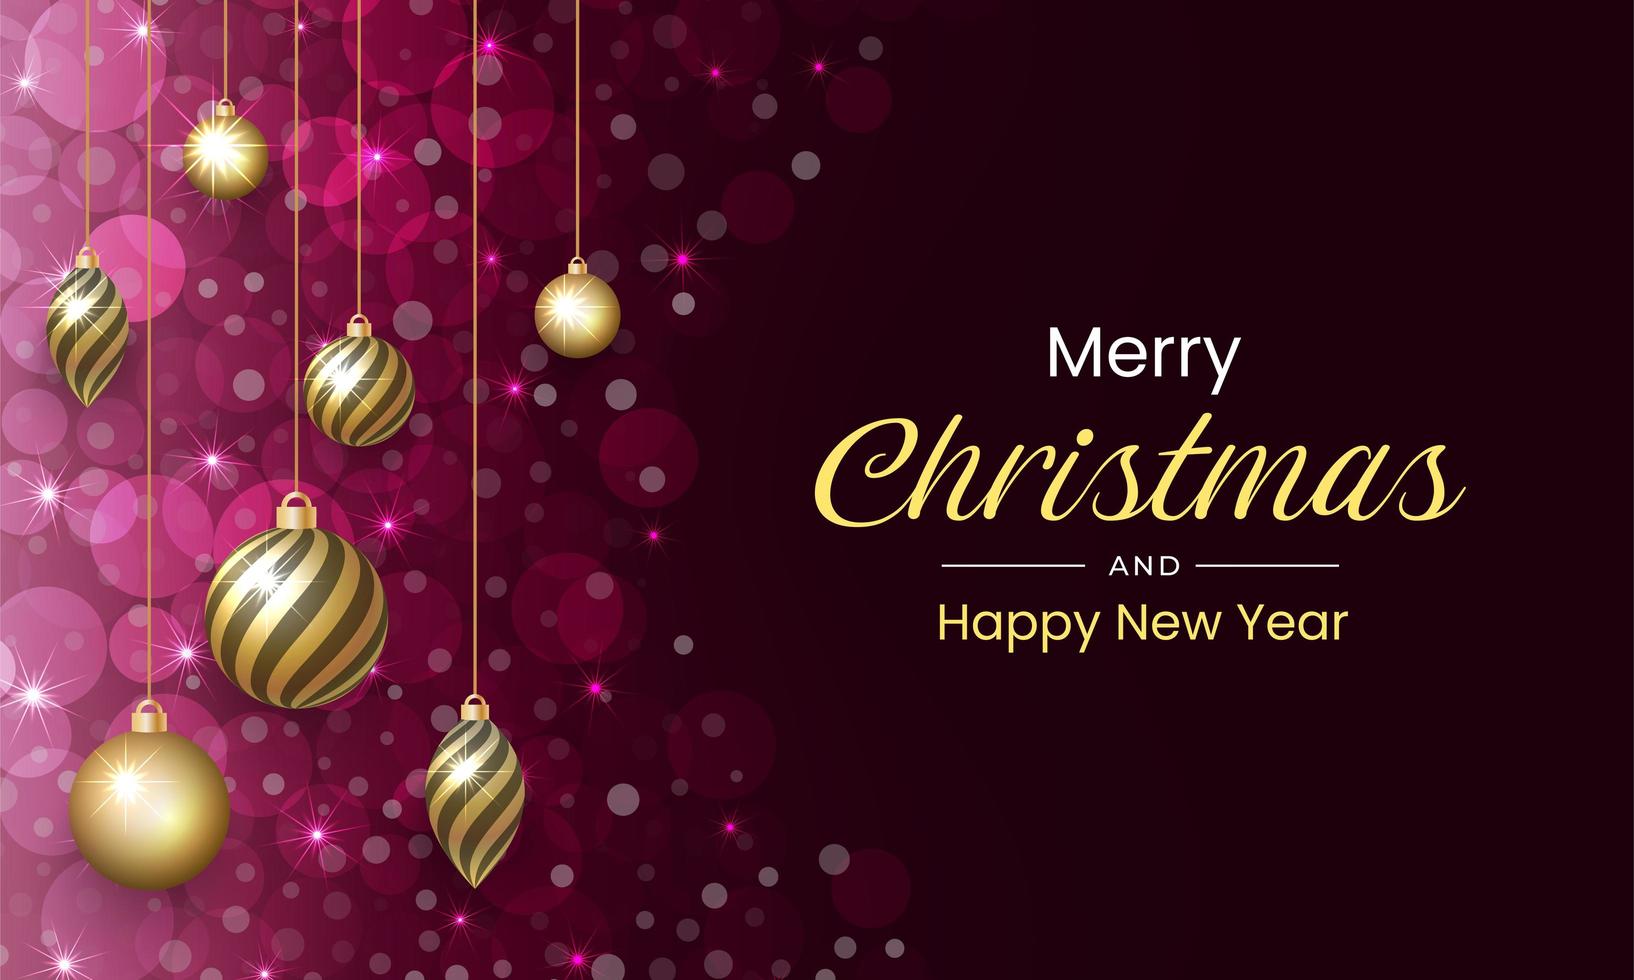 Merry Christmas with luxurious and sparkling background vector